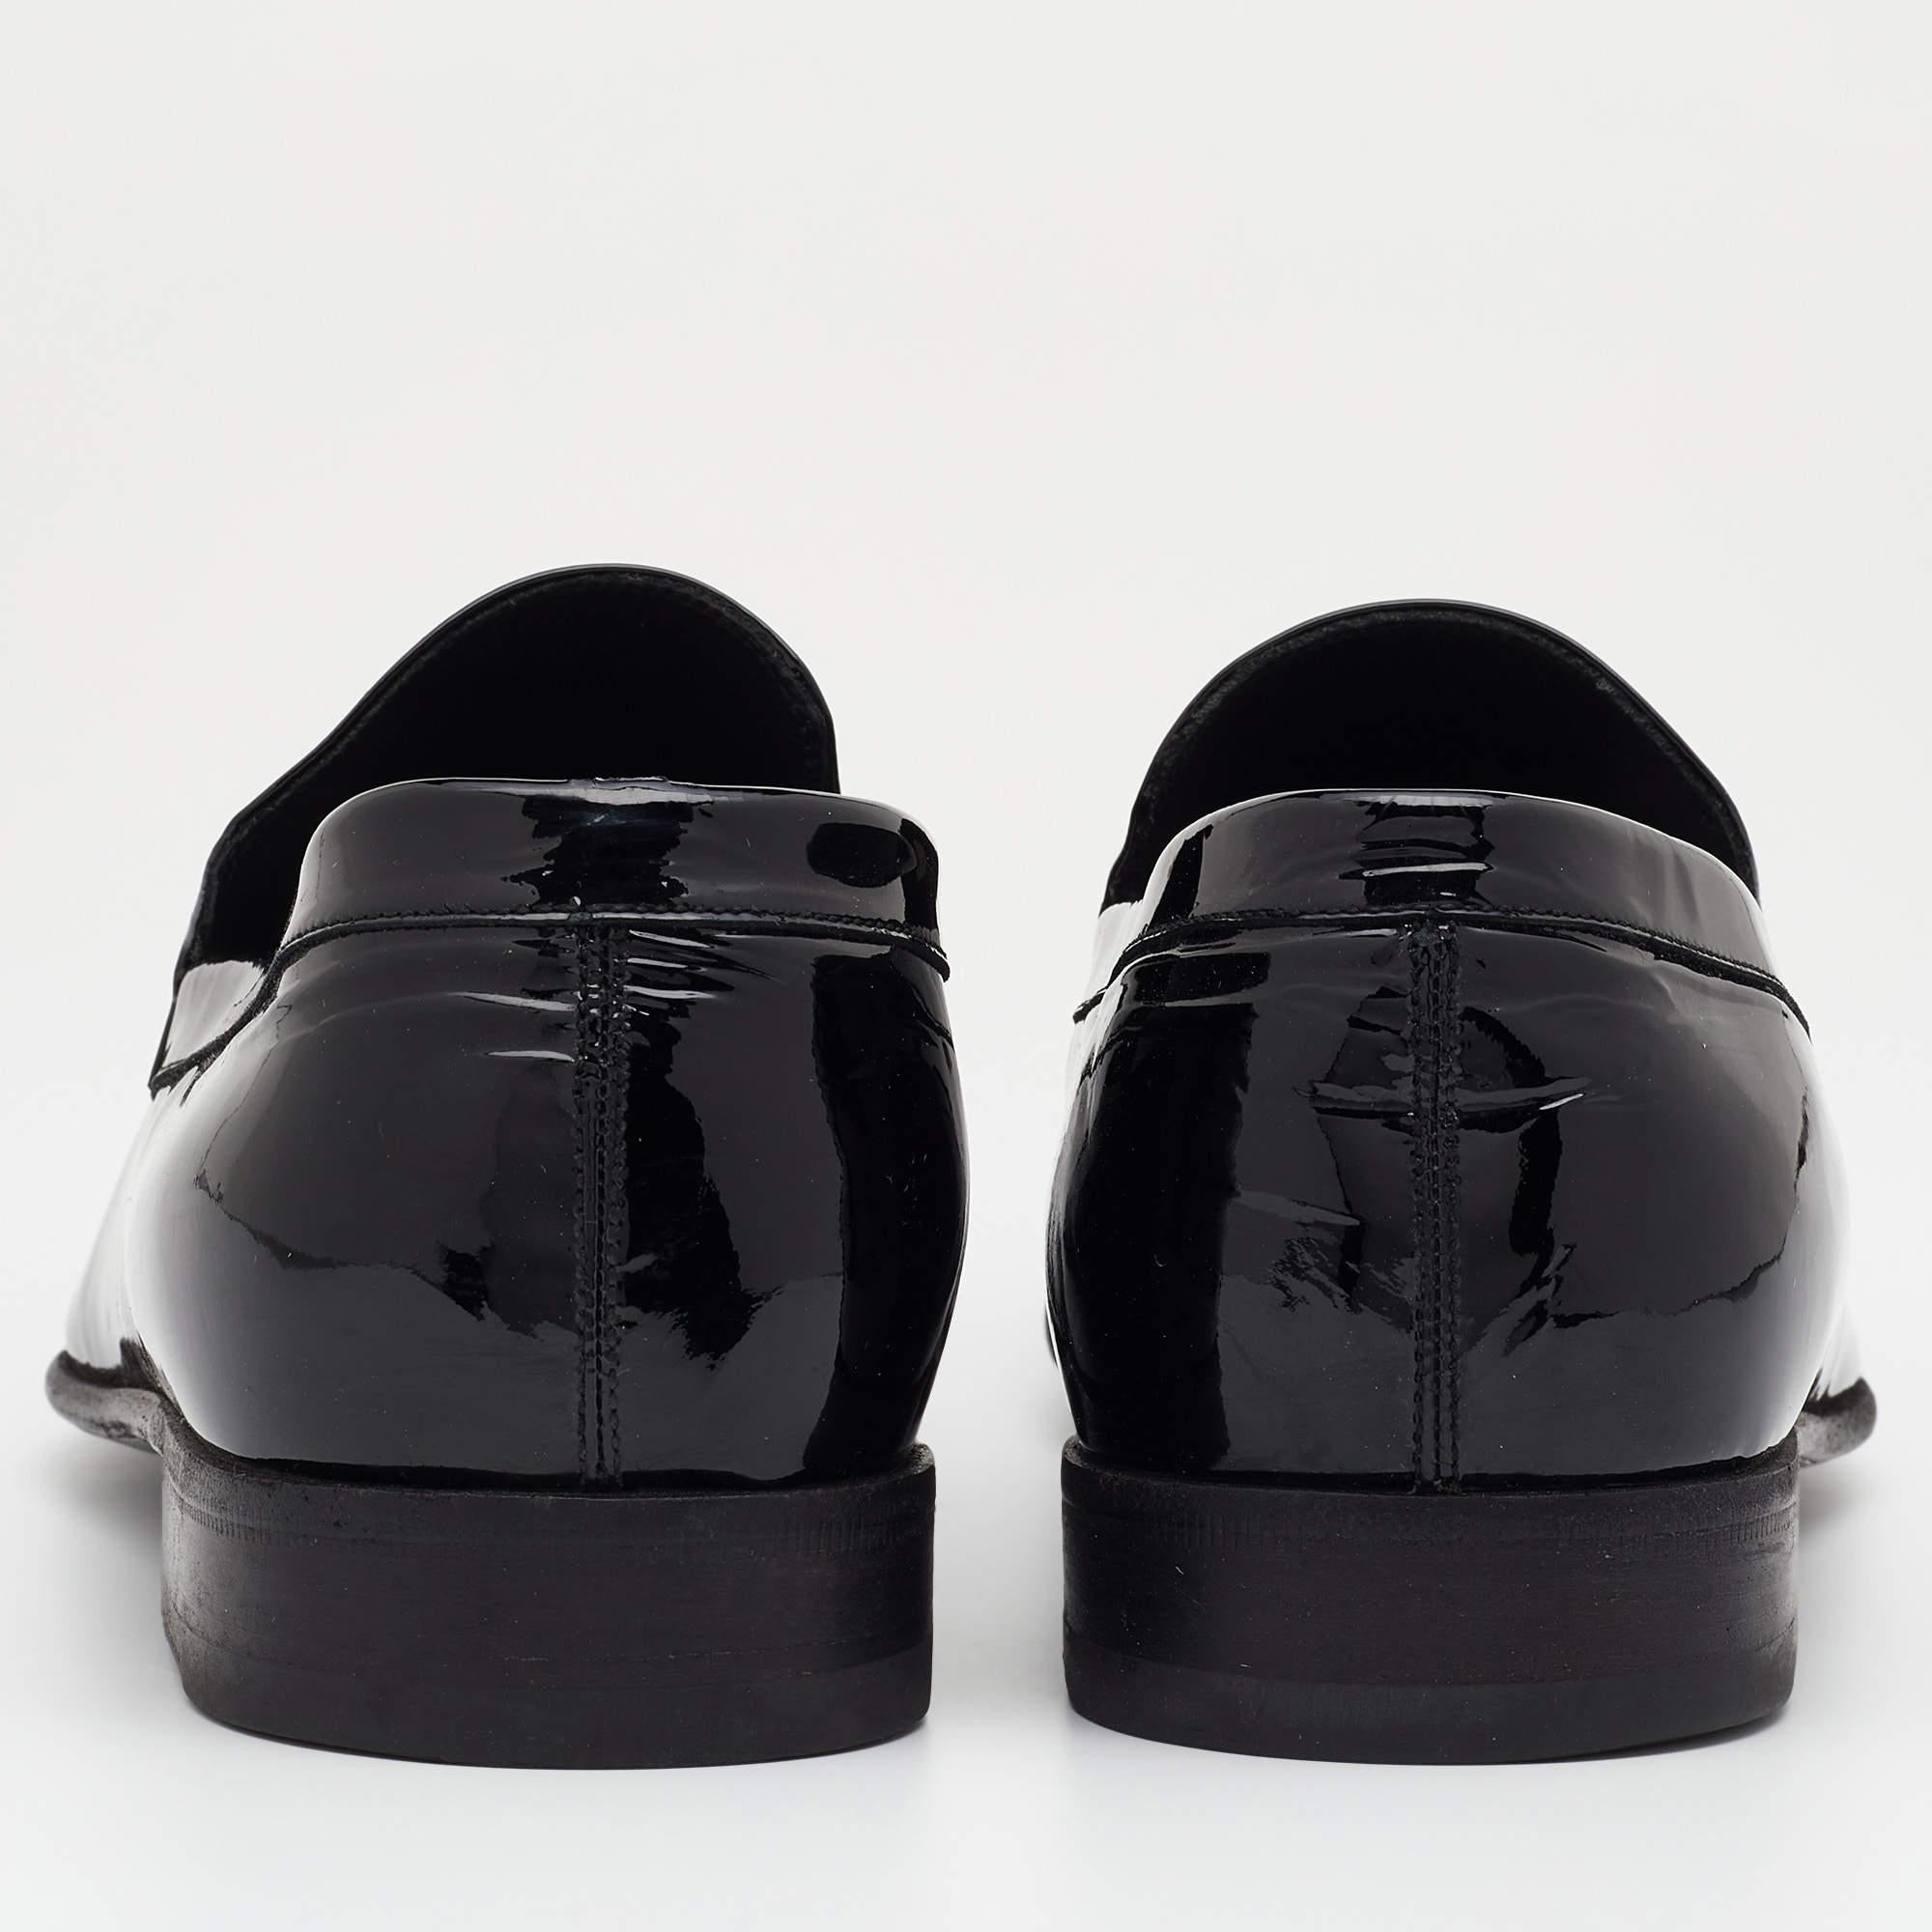 Functional and stylish, Gucci's collections capture the effortless, nonchalant finesse of the modern you. Crafted from patent leather in a black shade, these loafers are so comfortable you'll never want to take them off. They are topped with the